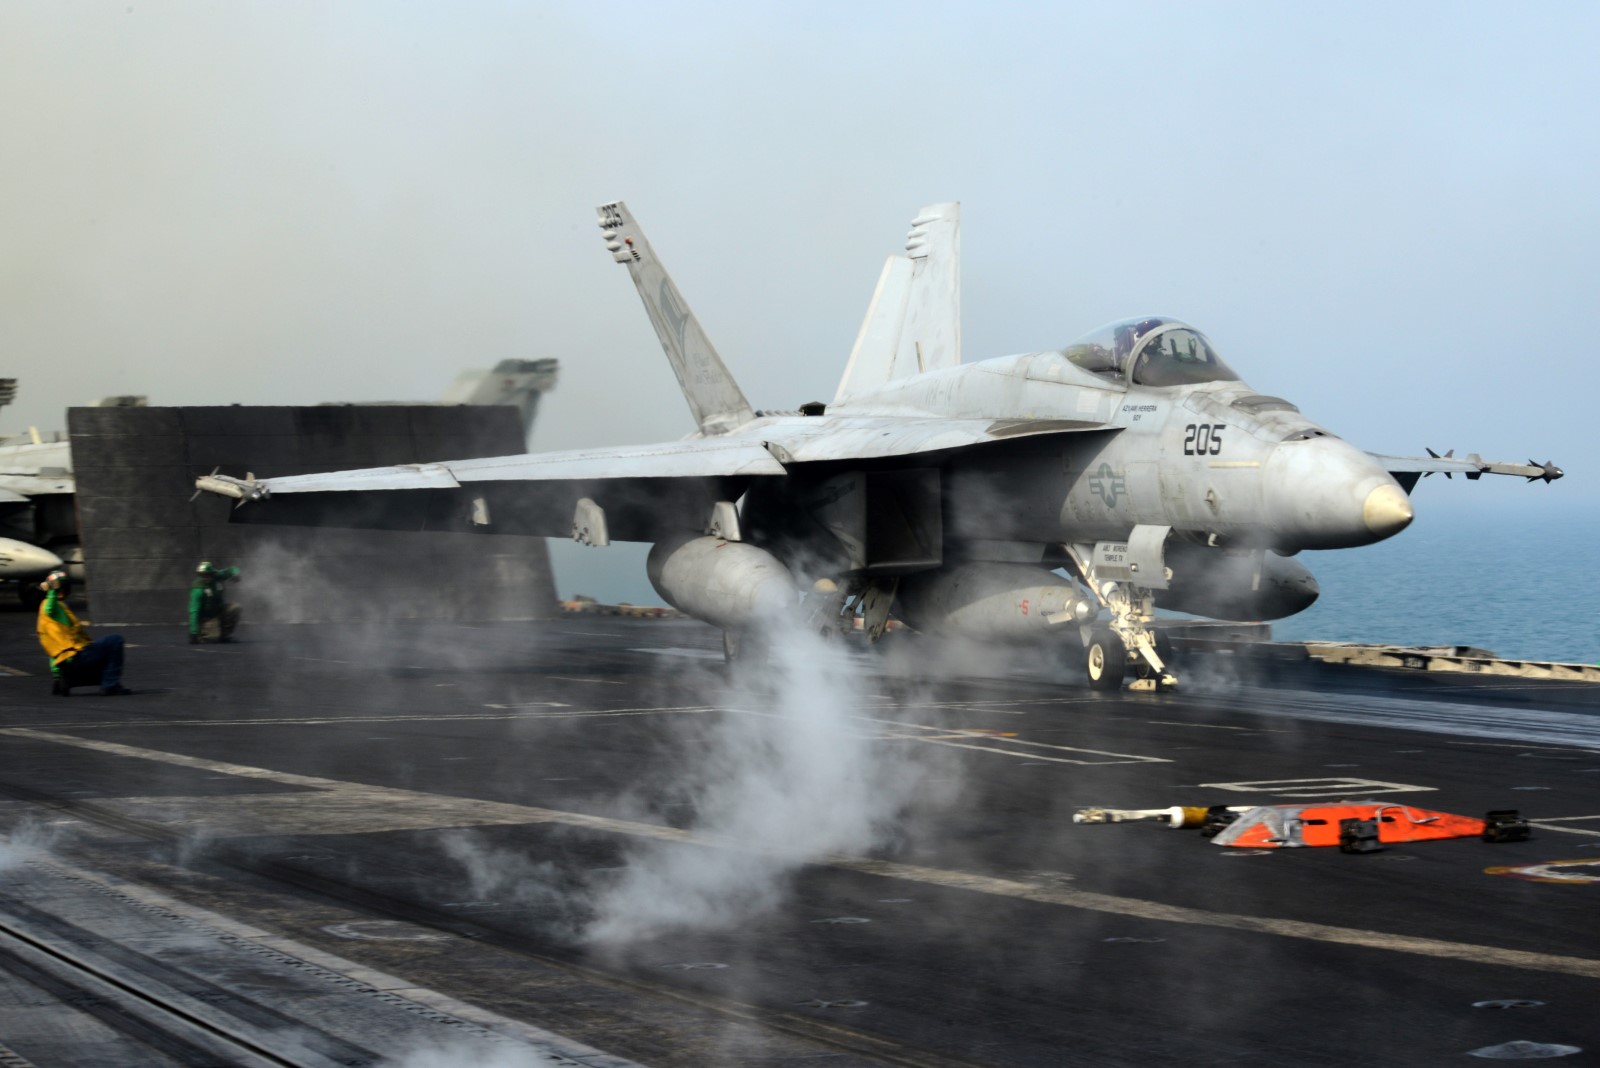 130128-N-OY799-111 
U.S. 5TH FLEET AREA OF RESPONSIBILITY (Jan. 28, 2013) An F/A-18E Super Hornet from the Tophatters of Strike Fighter Squadron (VFA) 14 launches from the aircraft carrier USS John C. Stennis (CVN 74). John C. Stennis is deployed to the U.S. 5th Fleet area of responsibility conducting maritime security operations, theater security cooperation efforts and support missions for Operation Enduring Freedom. (U.S. Navy photo by Mass Communication Specialist 2nd Class Kenneth Abbate/Released)